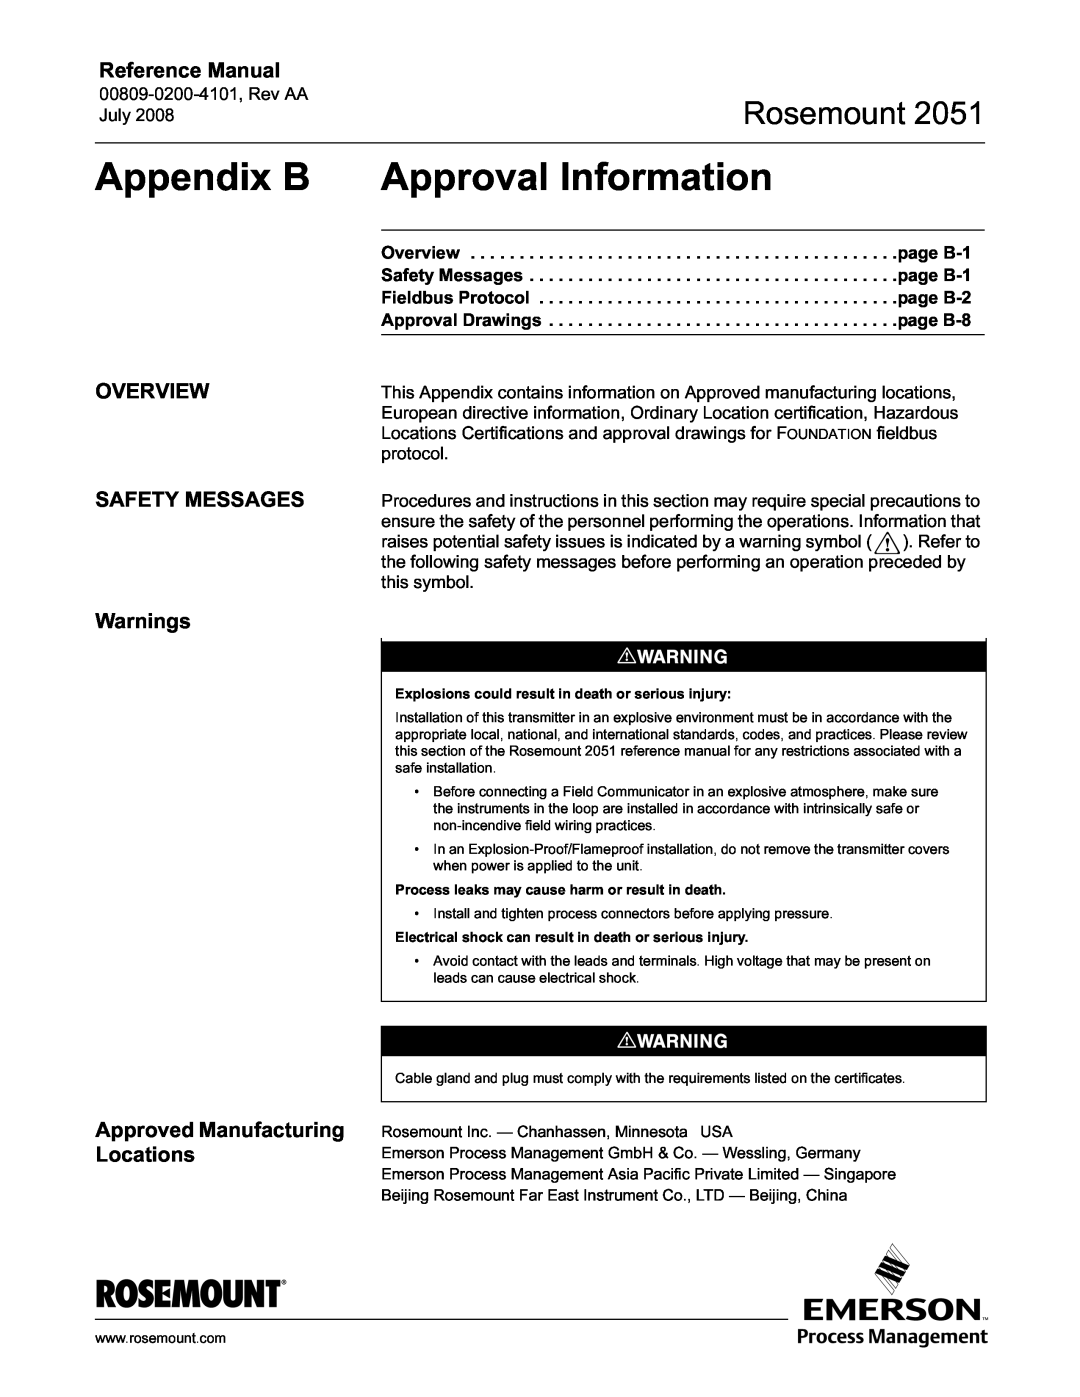 Emerson Process Management 2051 manual Appendix B Approval Information, Overview Safety Messages, Warnings, Rosemount 